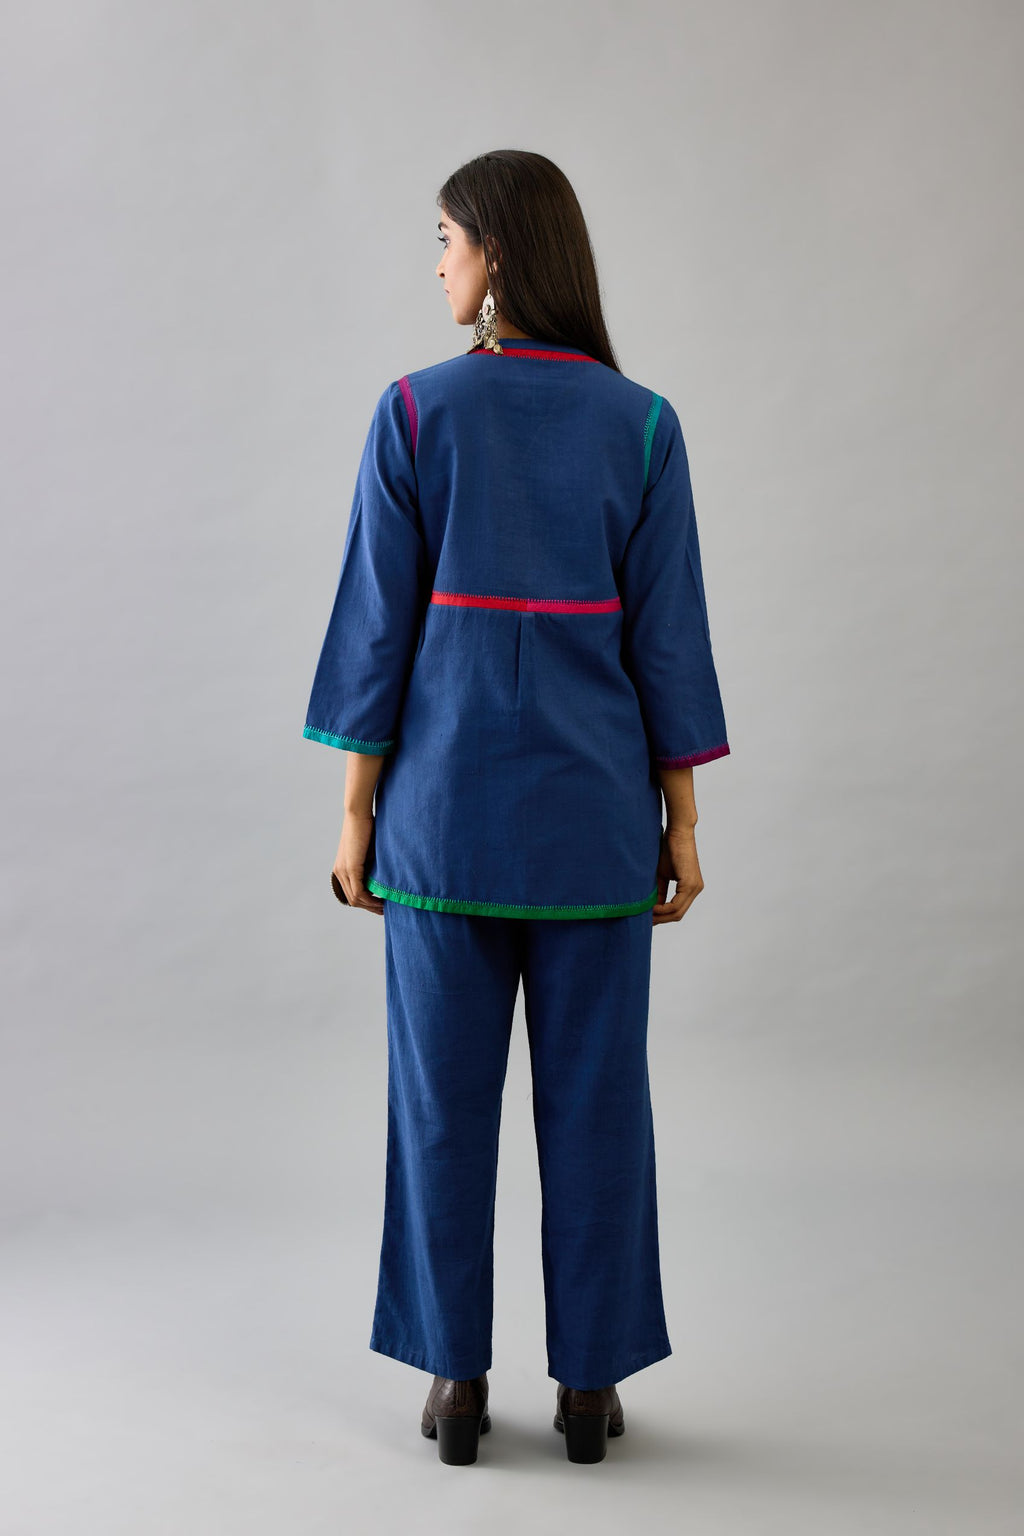 Blue handloom cotton short top with multi colored silk facings and embroidery detail, paired with blue handloom cotton straight pants.